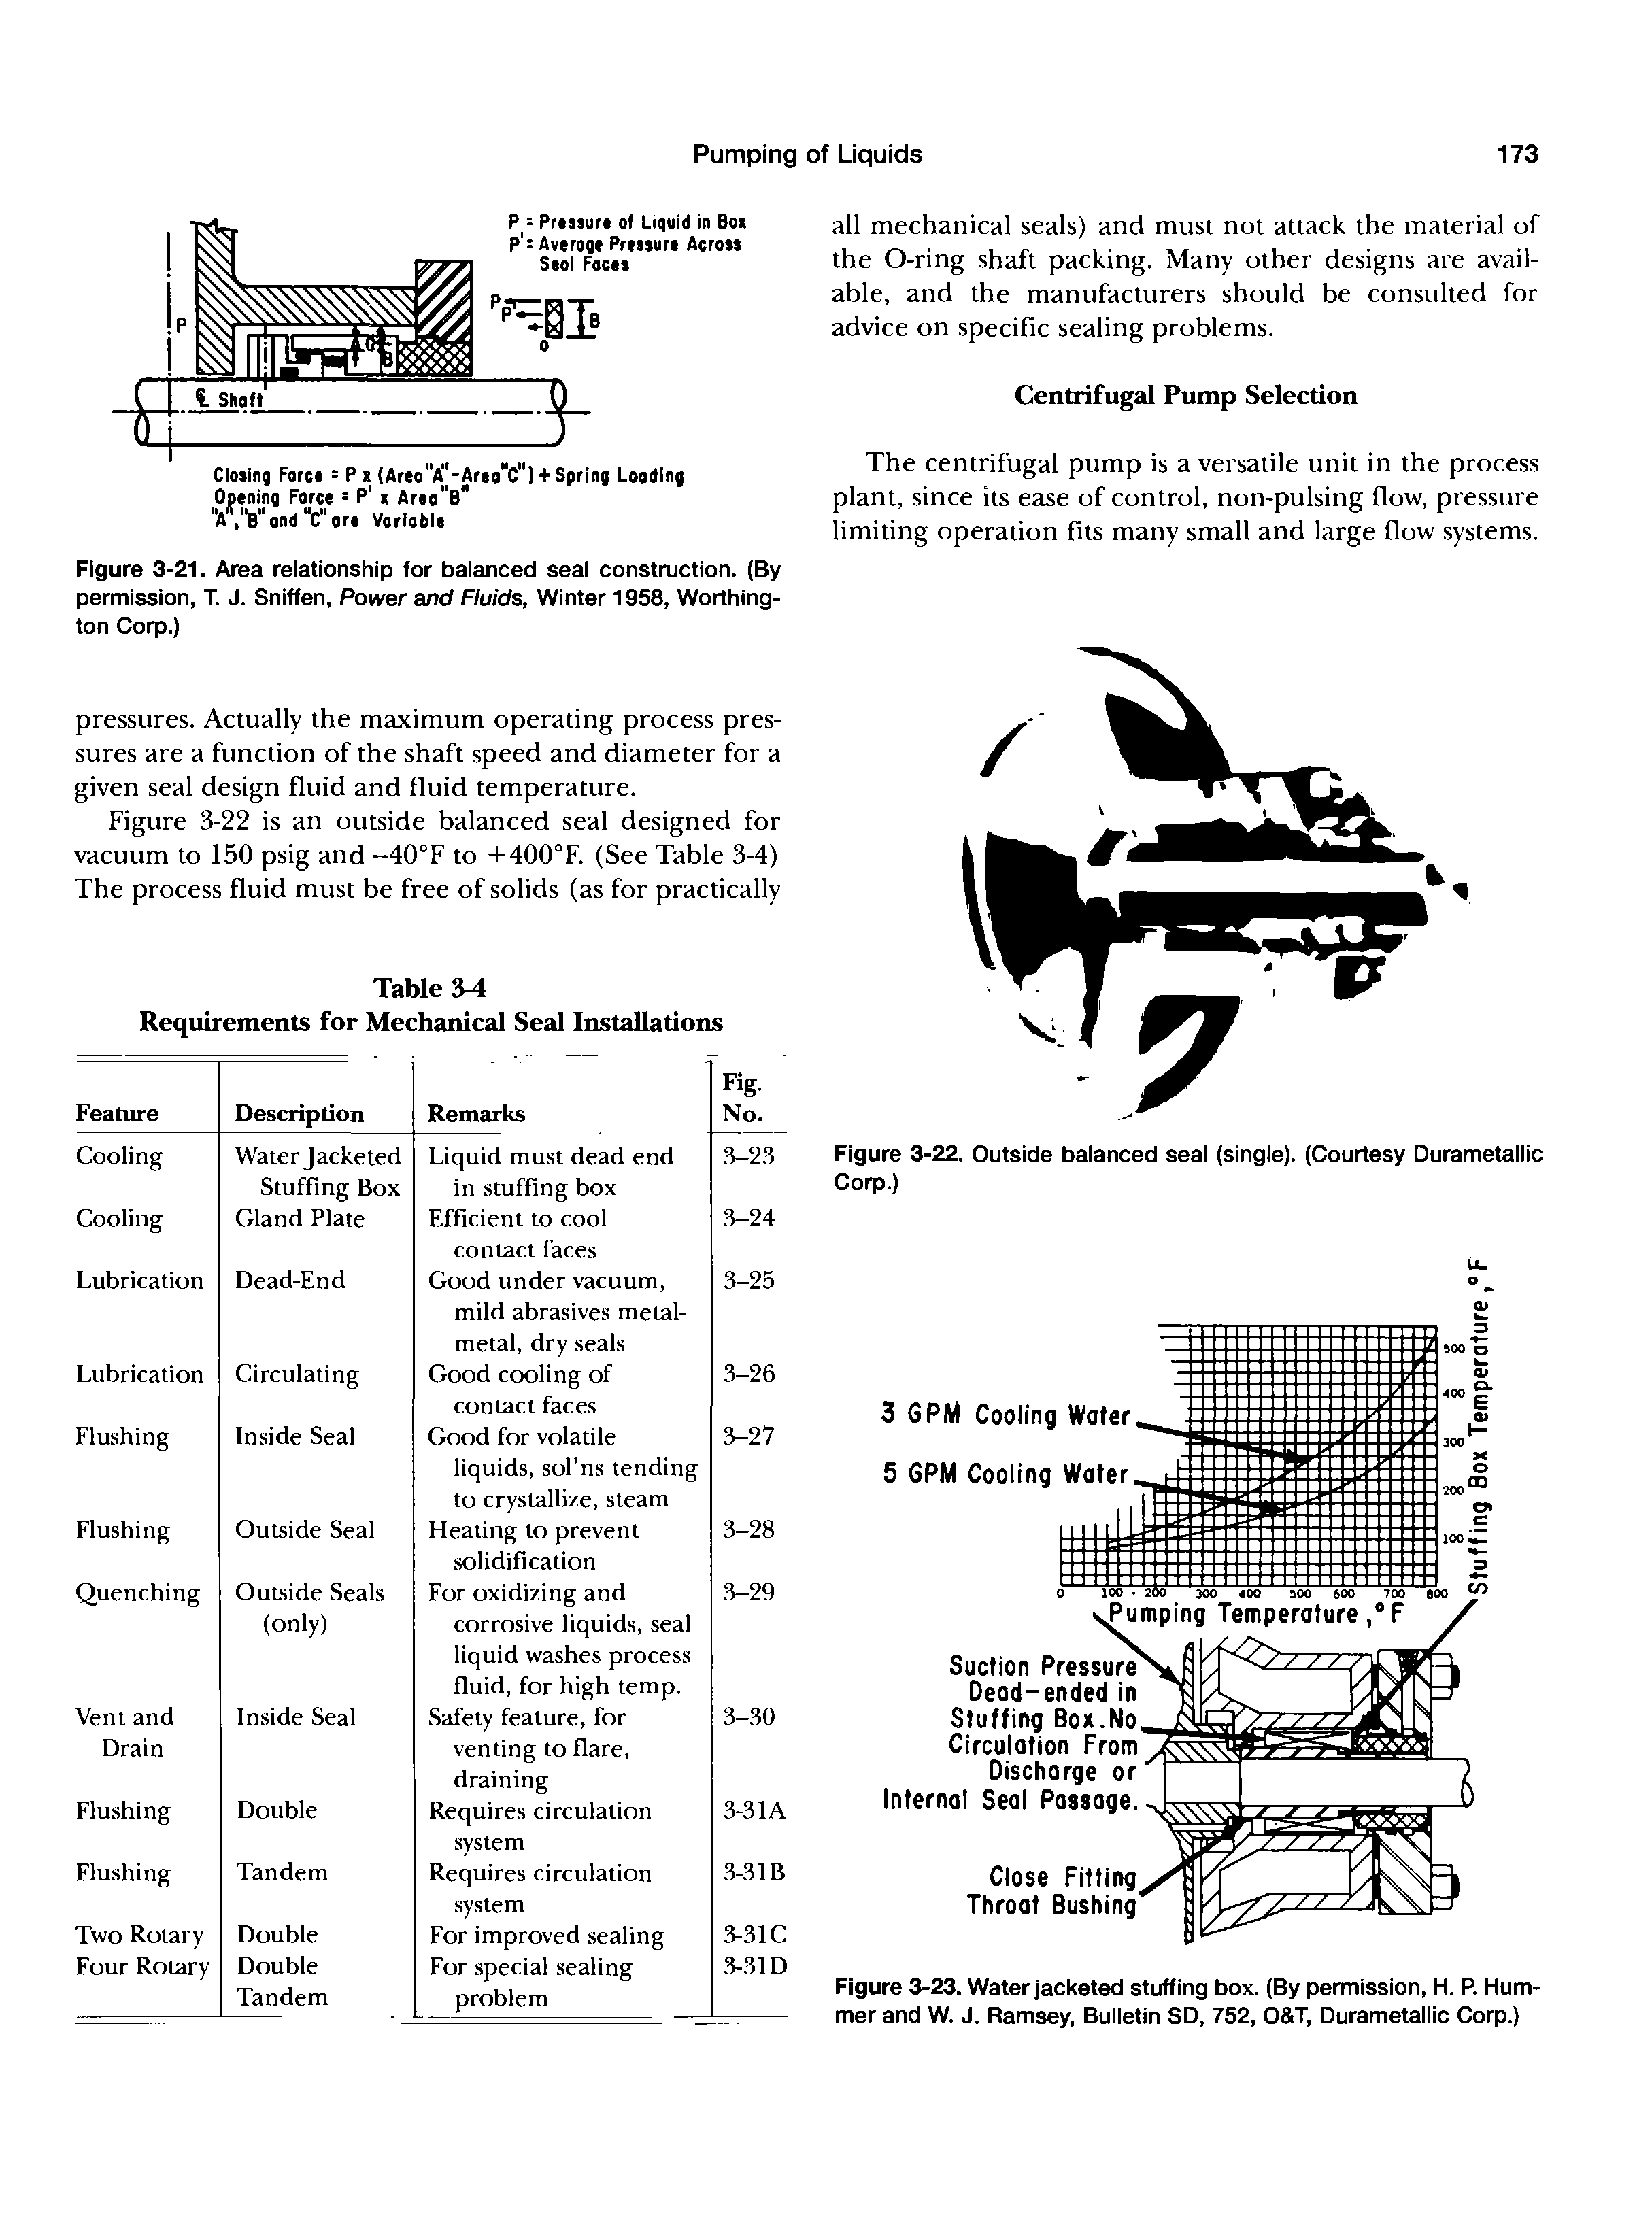 Figure 3-21. Area relationship for balanced seal construction. (By permission, T. J. Sniffen, Power and Fluids, Winter 1958, Worthington Corp.)...